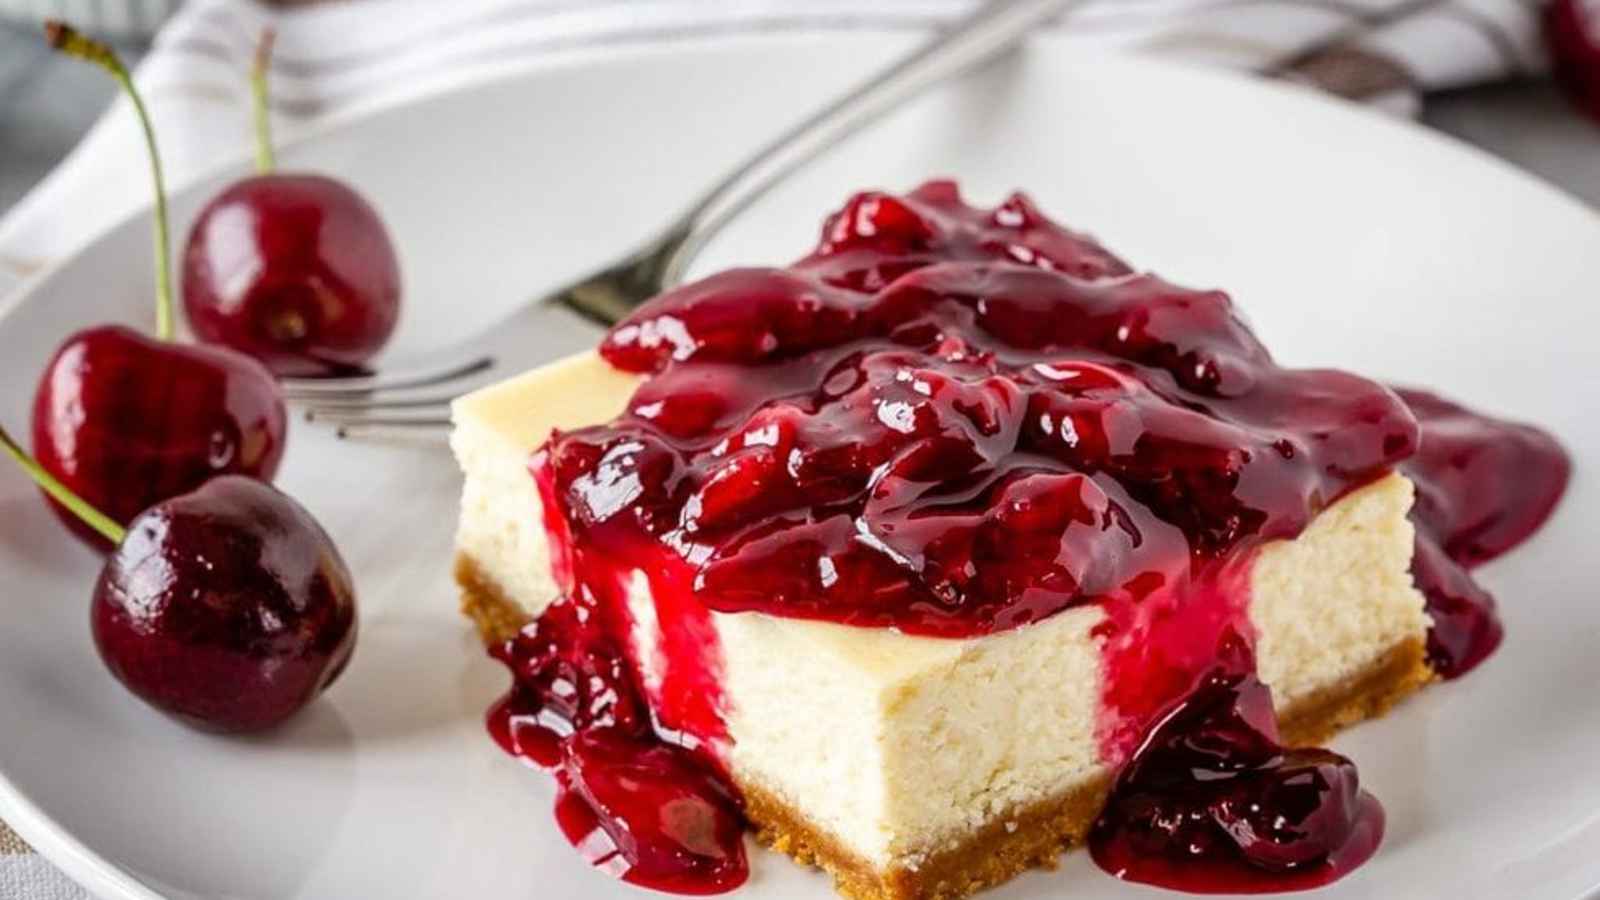 National Cherry Dessert Day 2023: Date, History, Facts, Activities